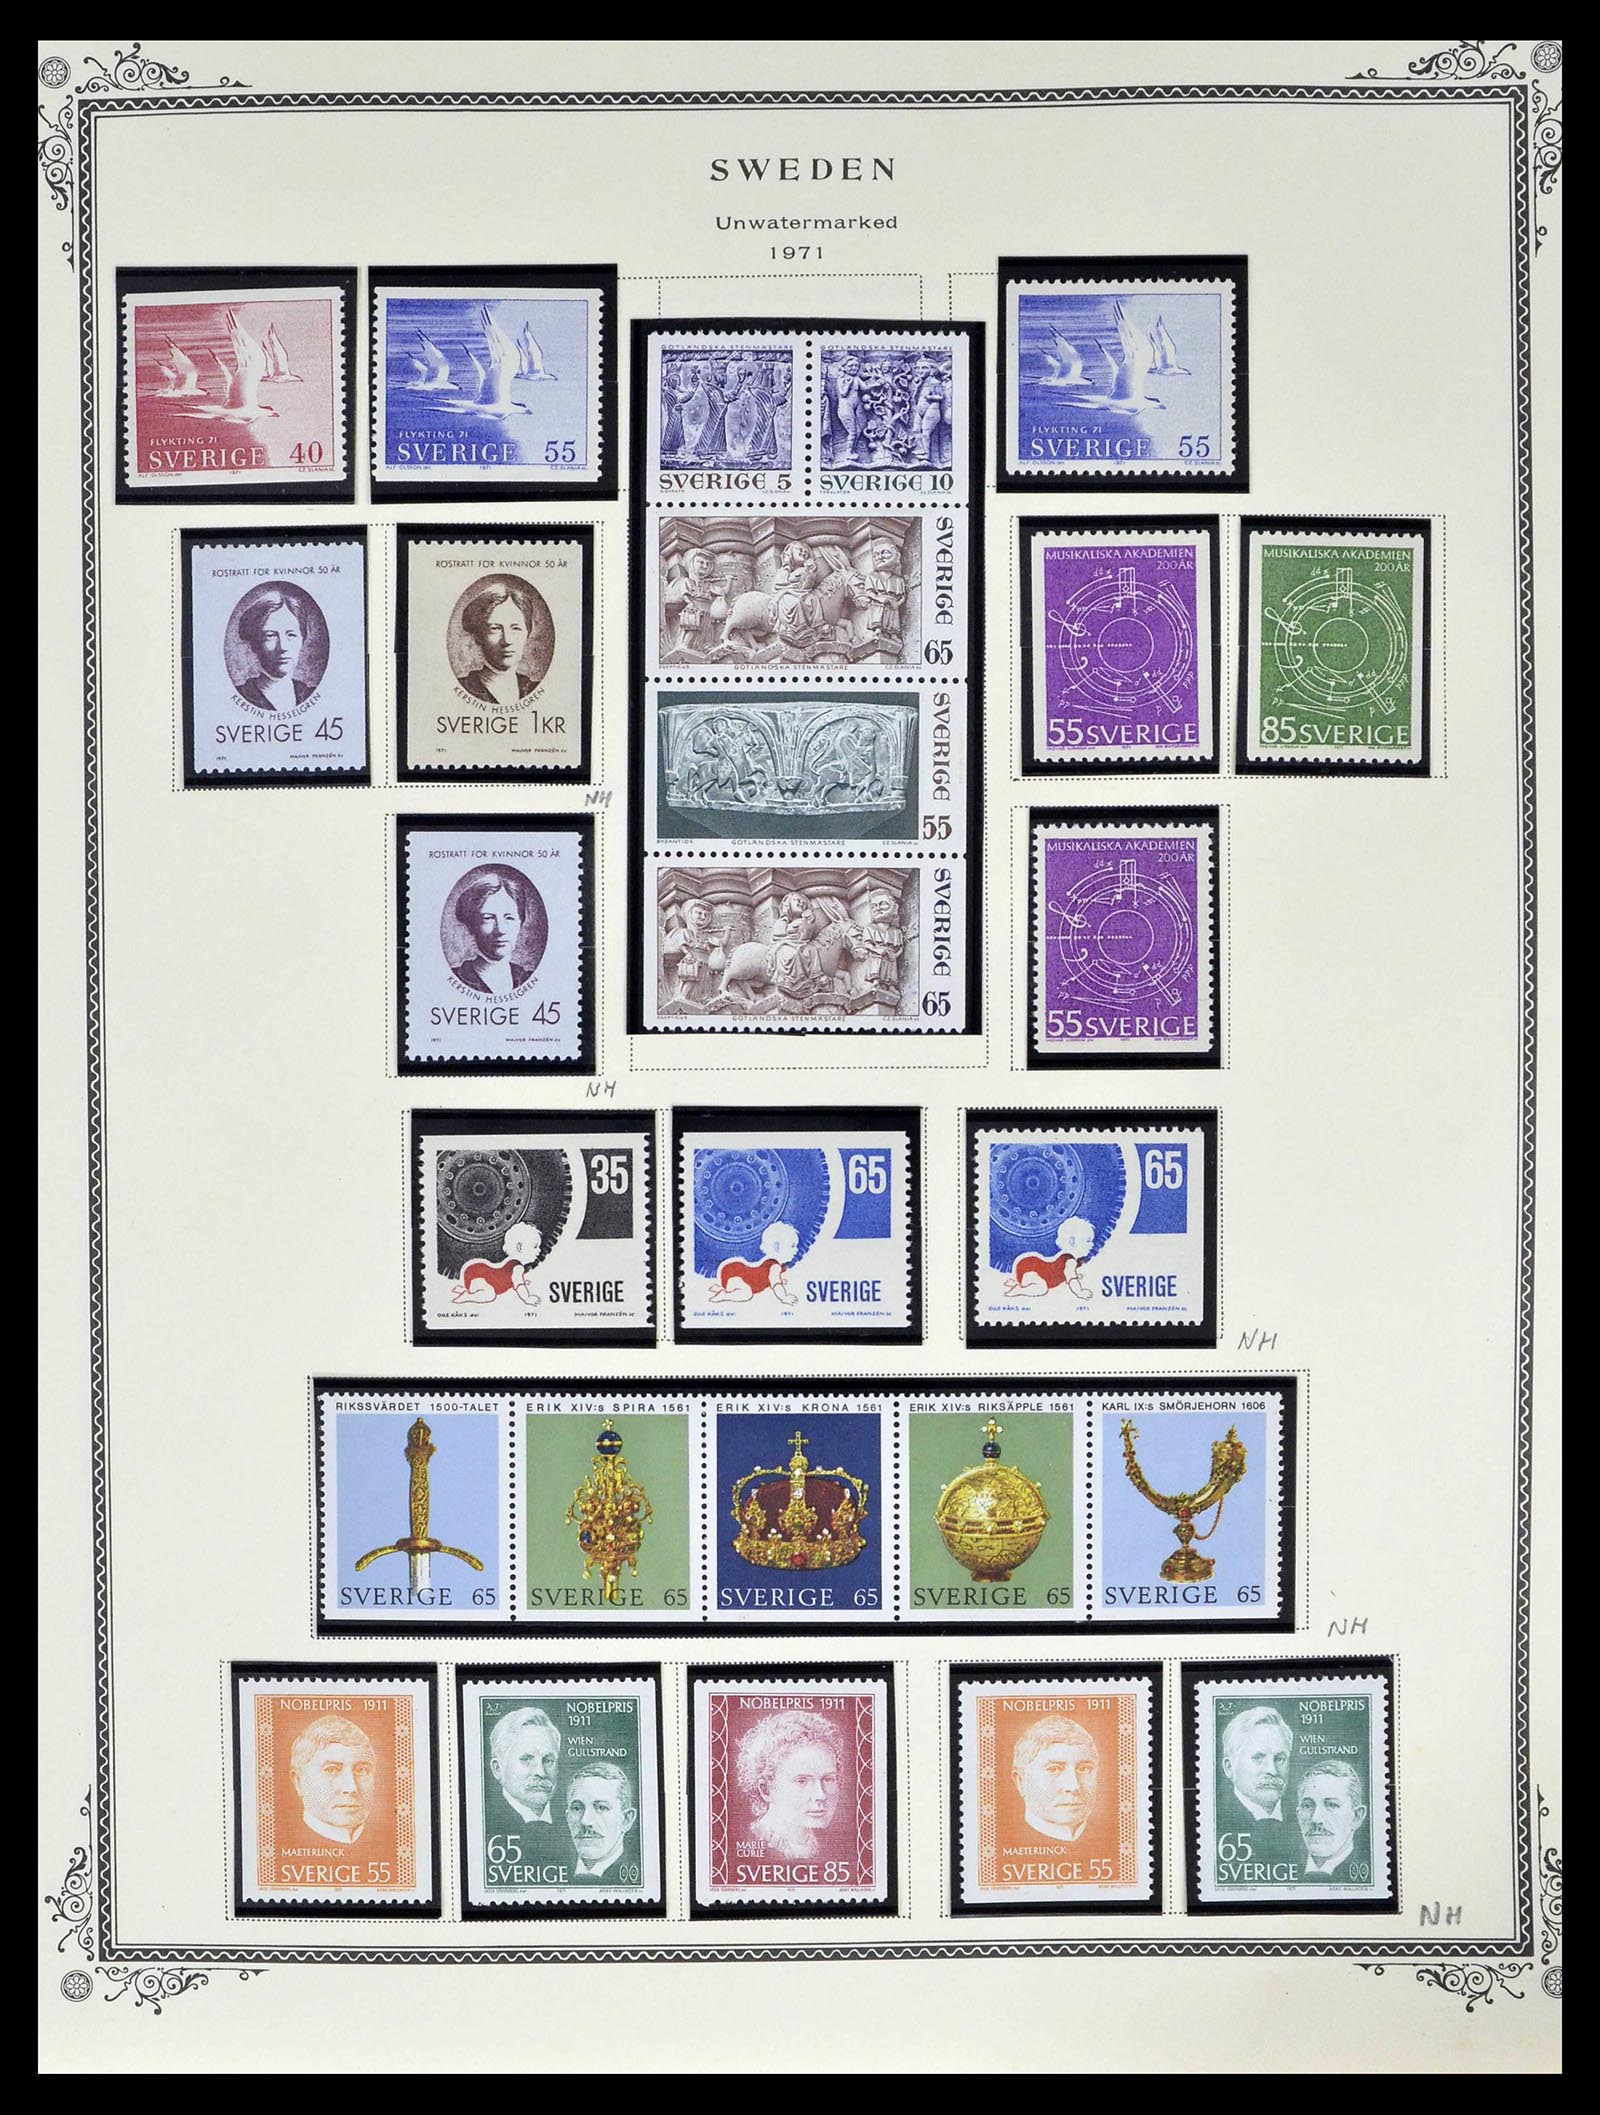 39179 0088 - Stamp collection 39179 Sweden 1855-1997.